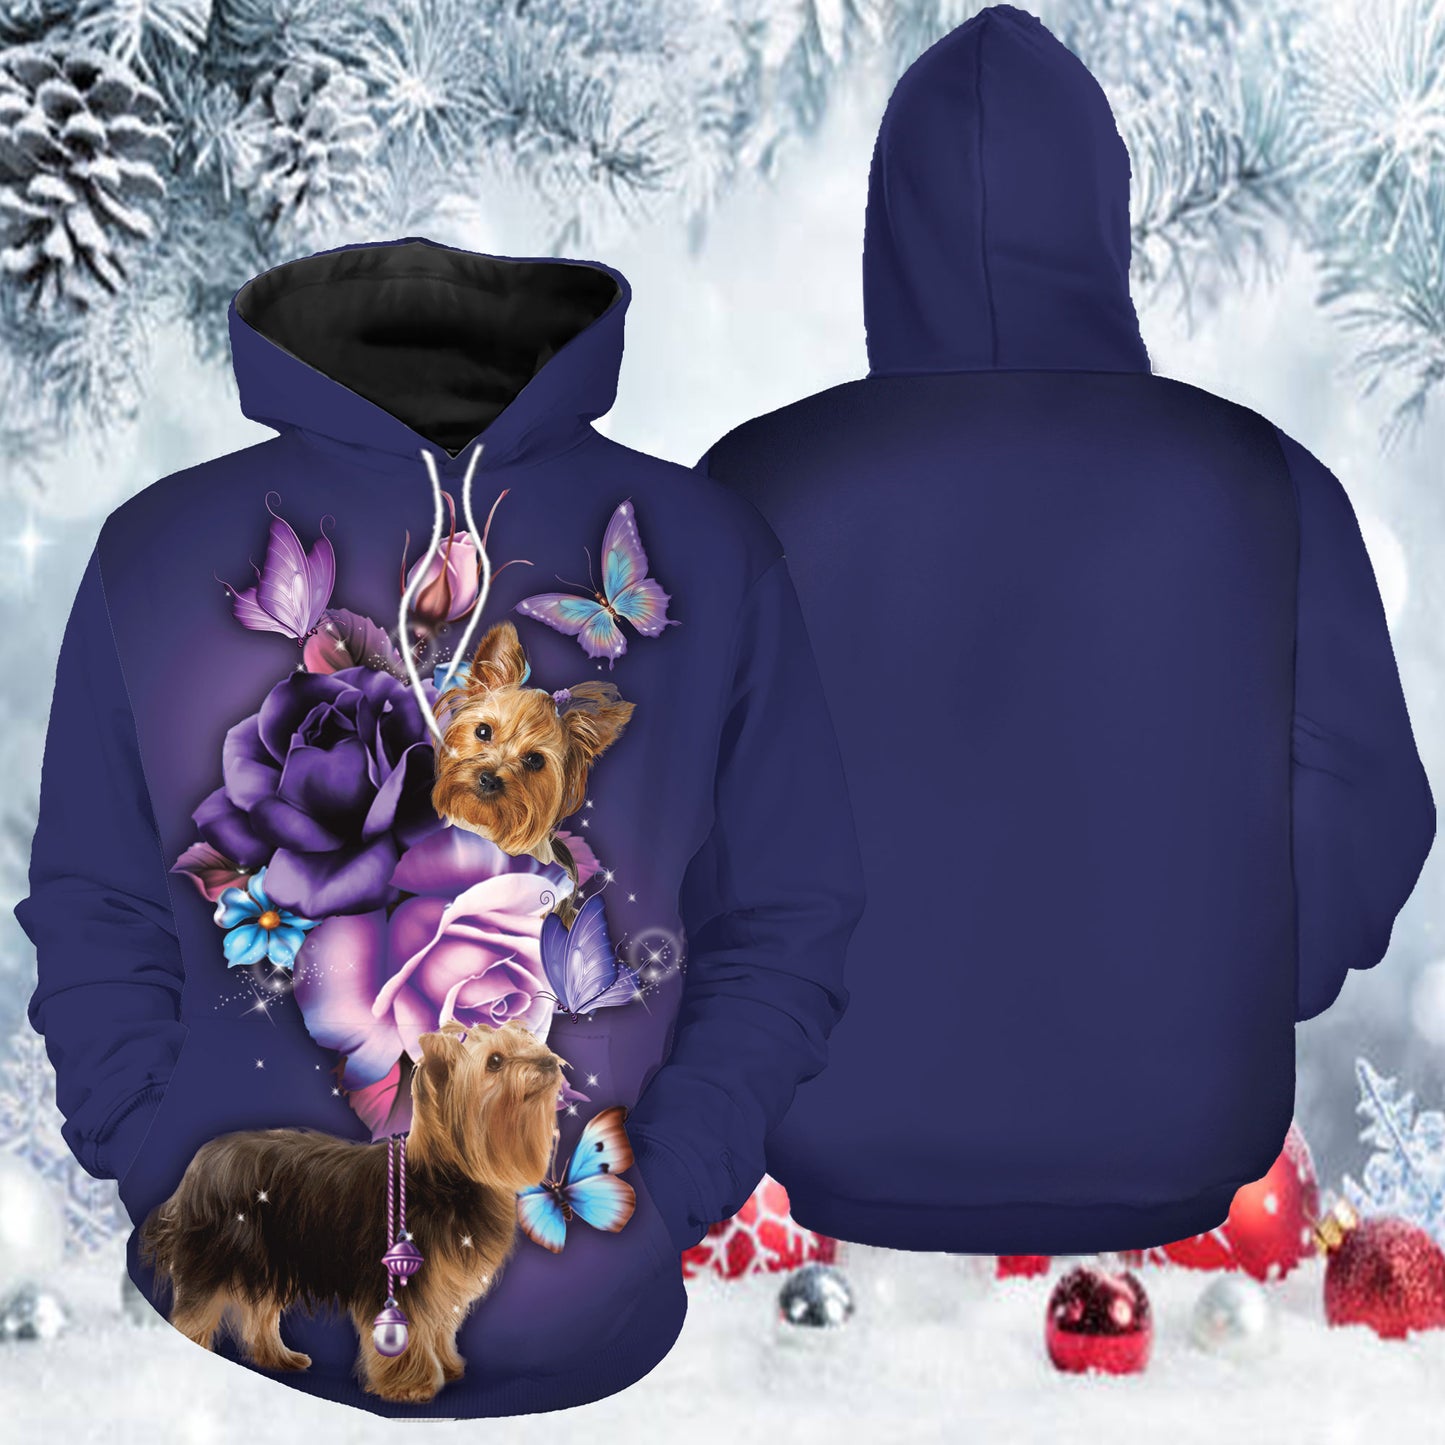 Yorkshire Terrier Magical G5121 unisex womens & mens, couples matching, friends, yorkshire terrier lover, funny family sublimation 3D hoodie christmas holiday gifts (plus size available)